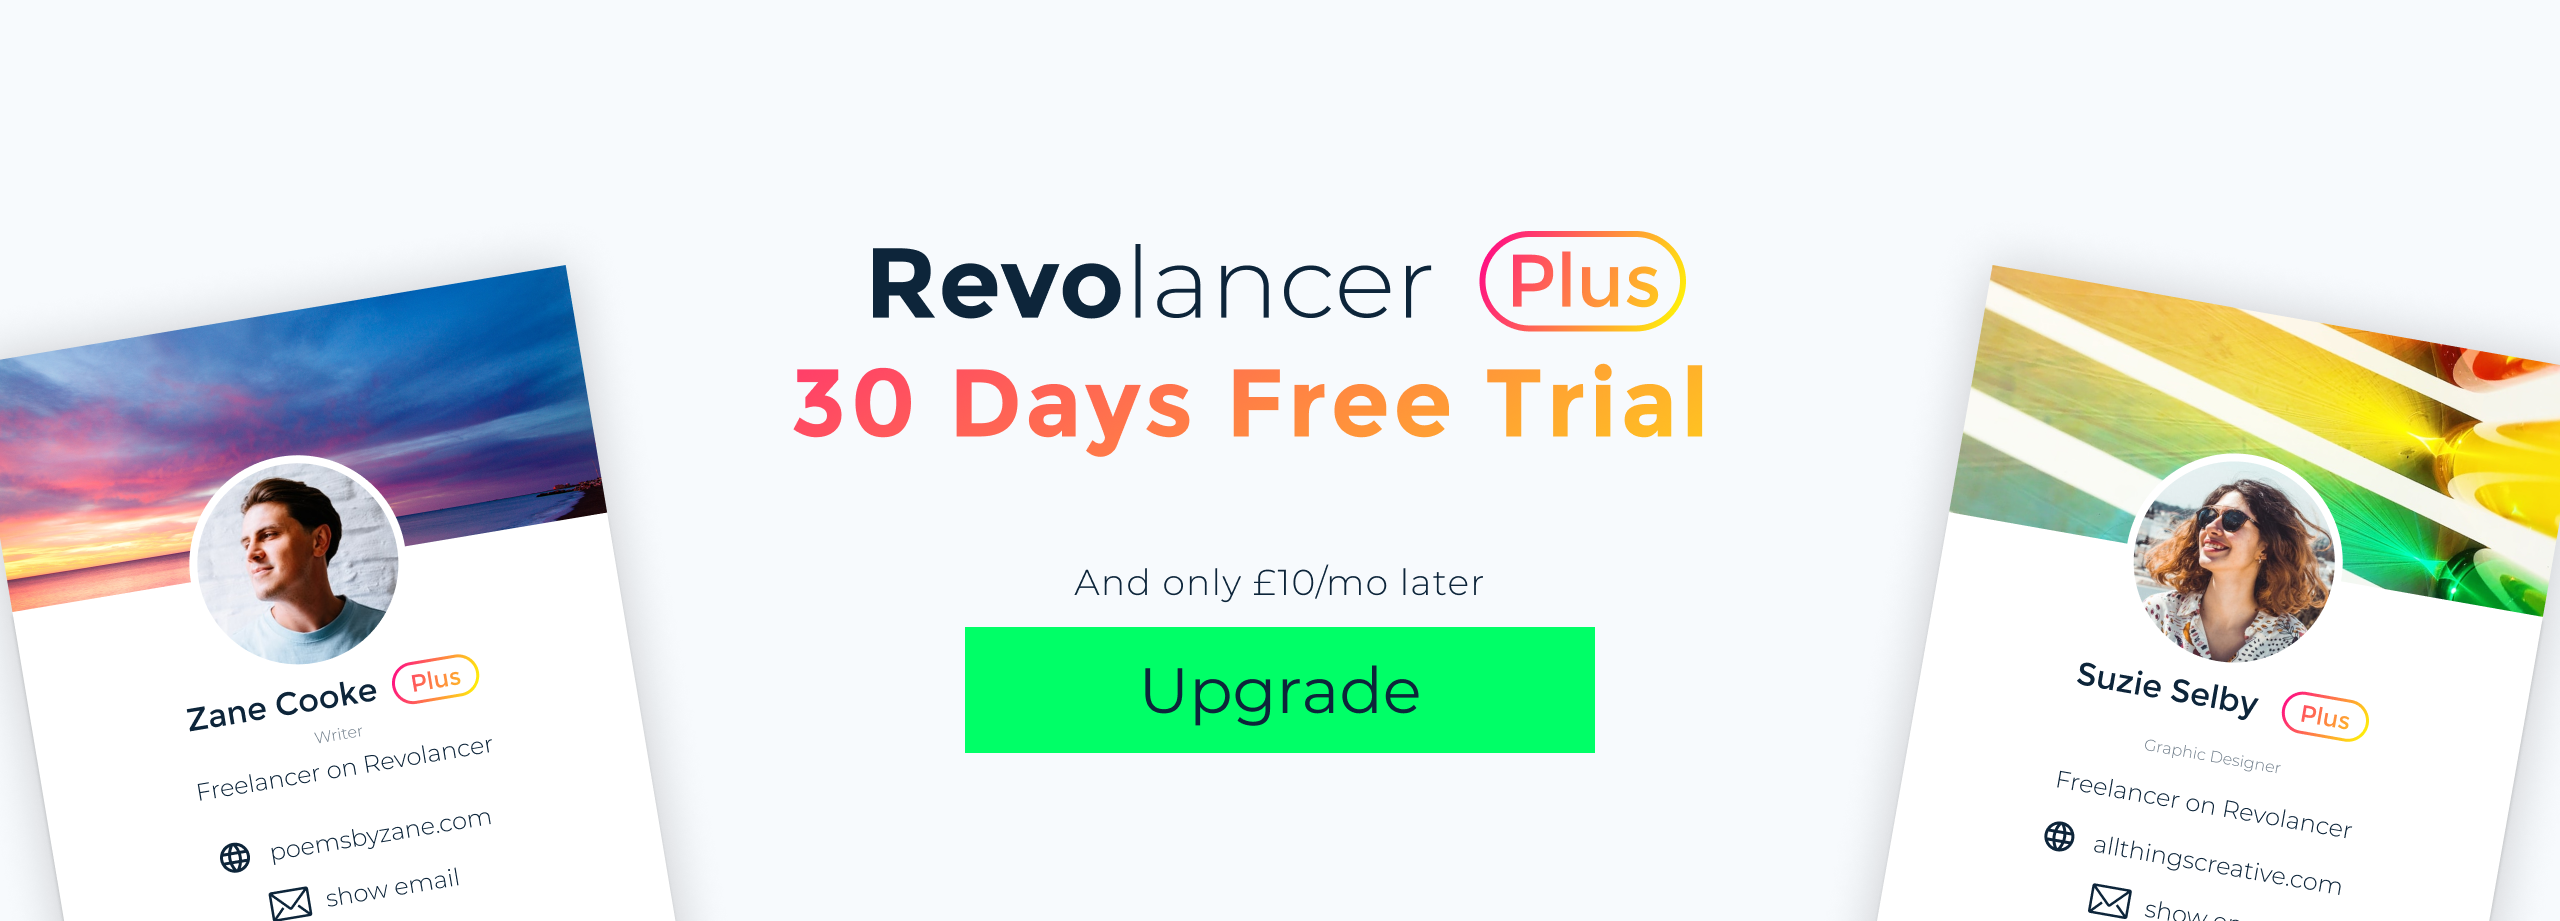 30-day free trial and price